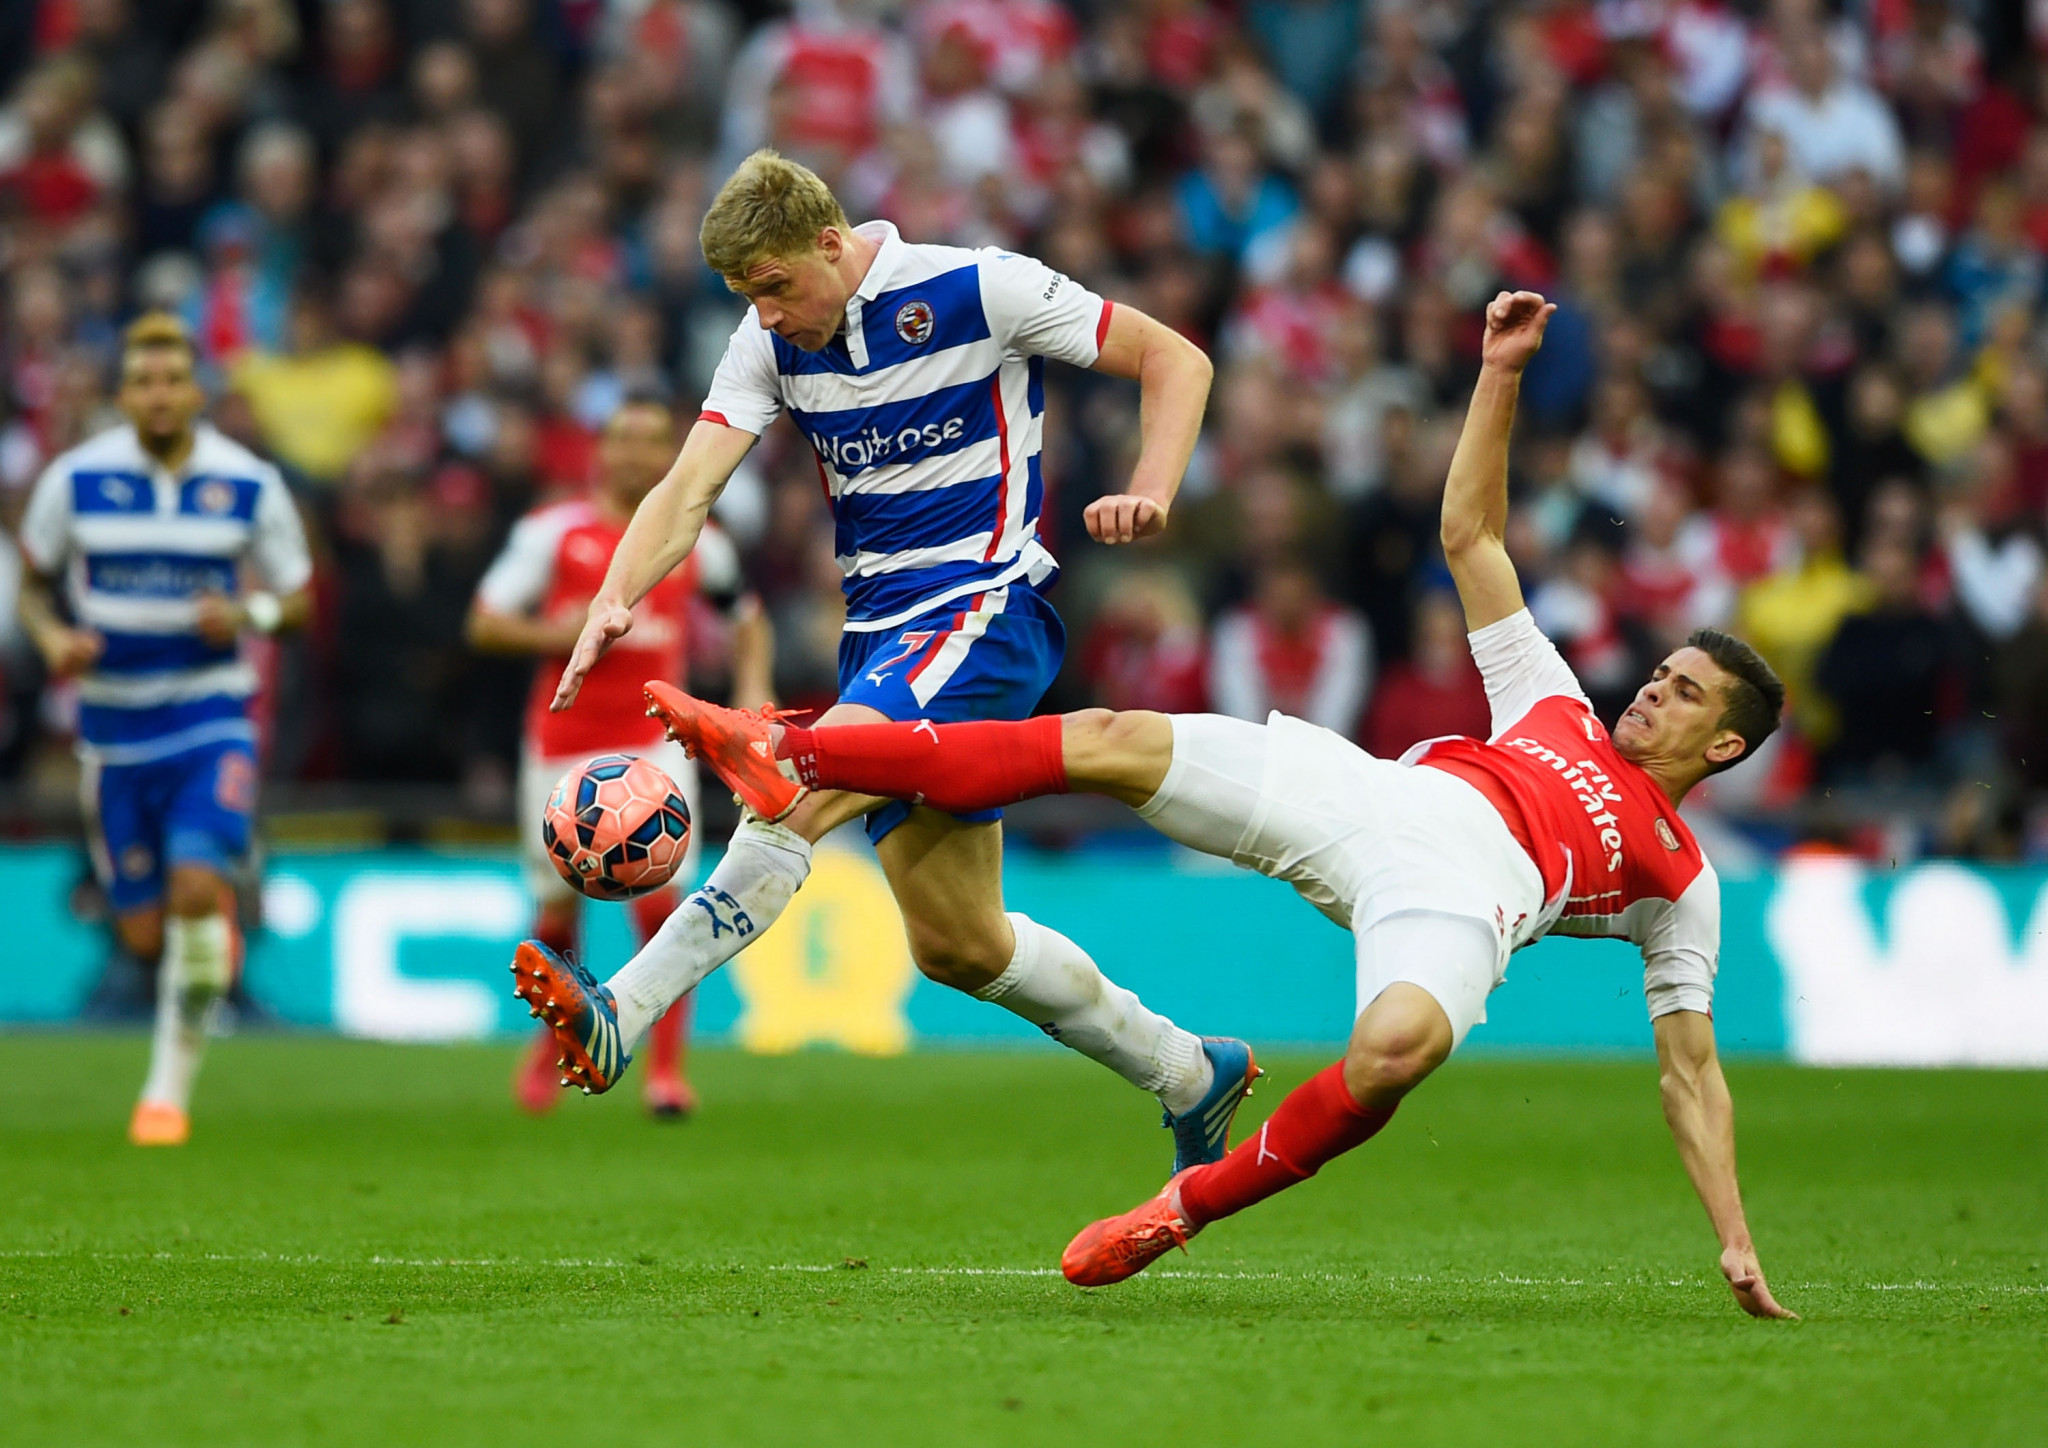 Russia's Pavel Pogrebnyak has played for a number of teams, including Reading in the English Premier League ©Getty Images